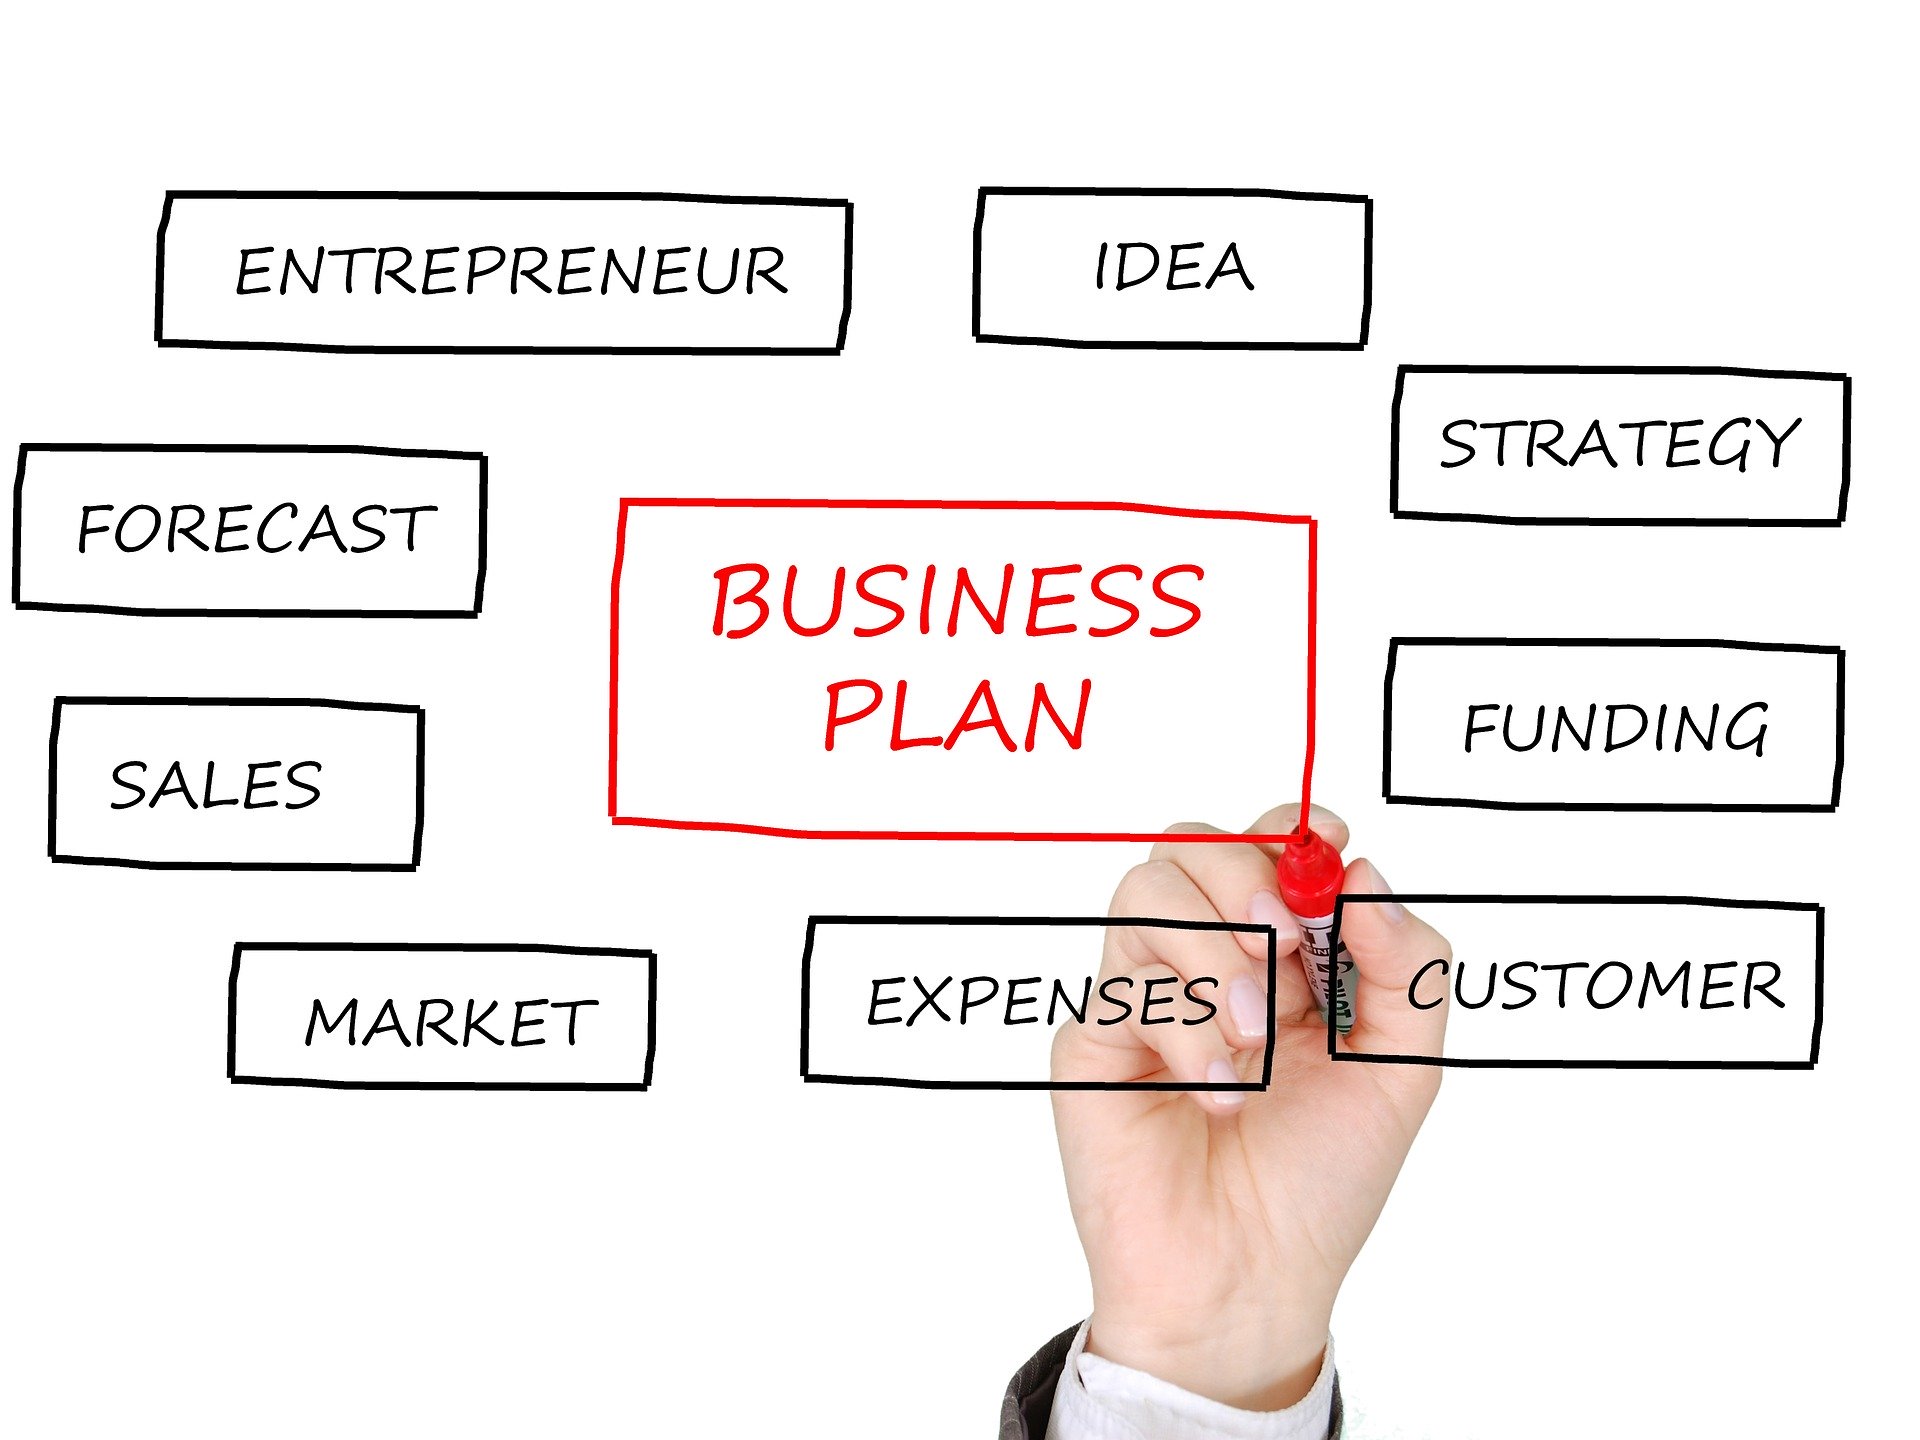 good business plan must contain